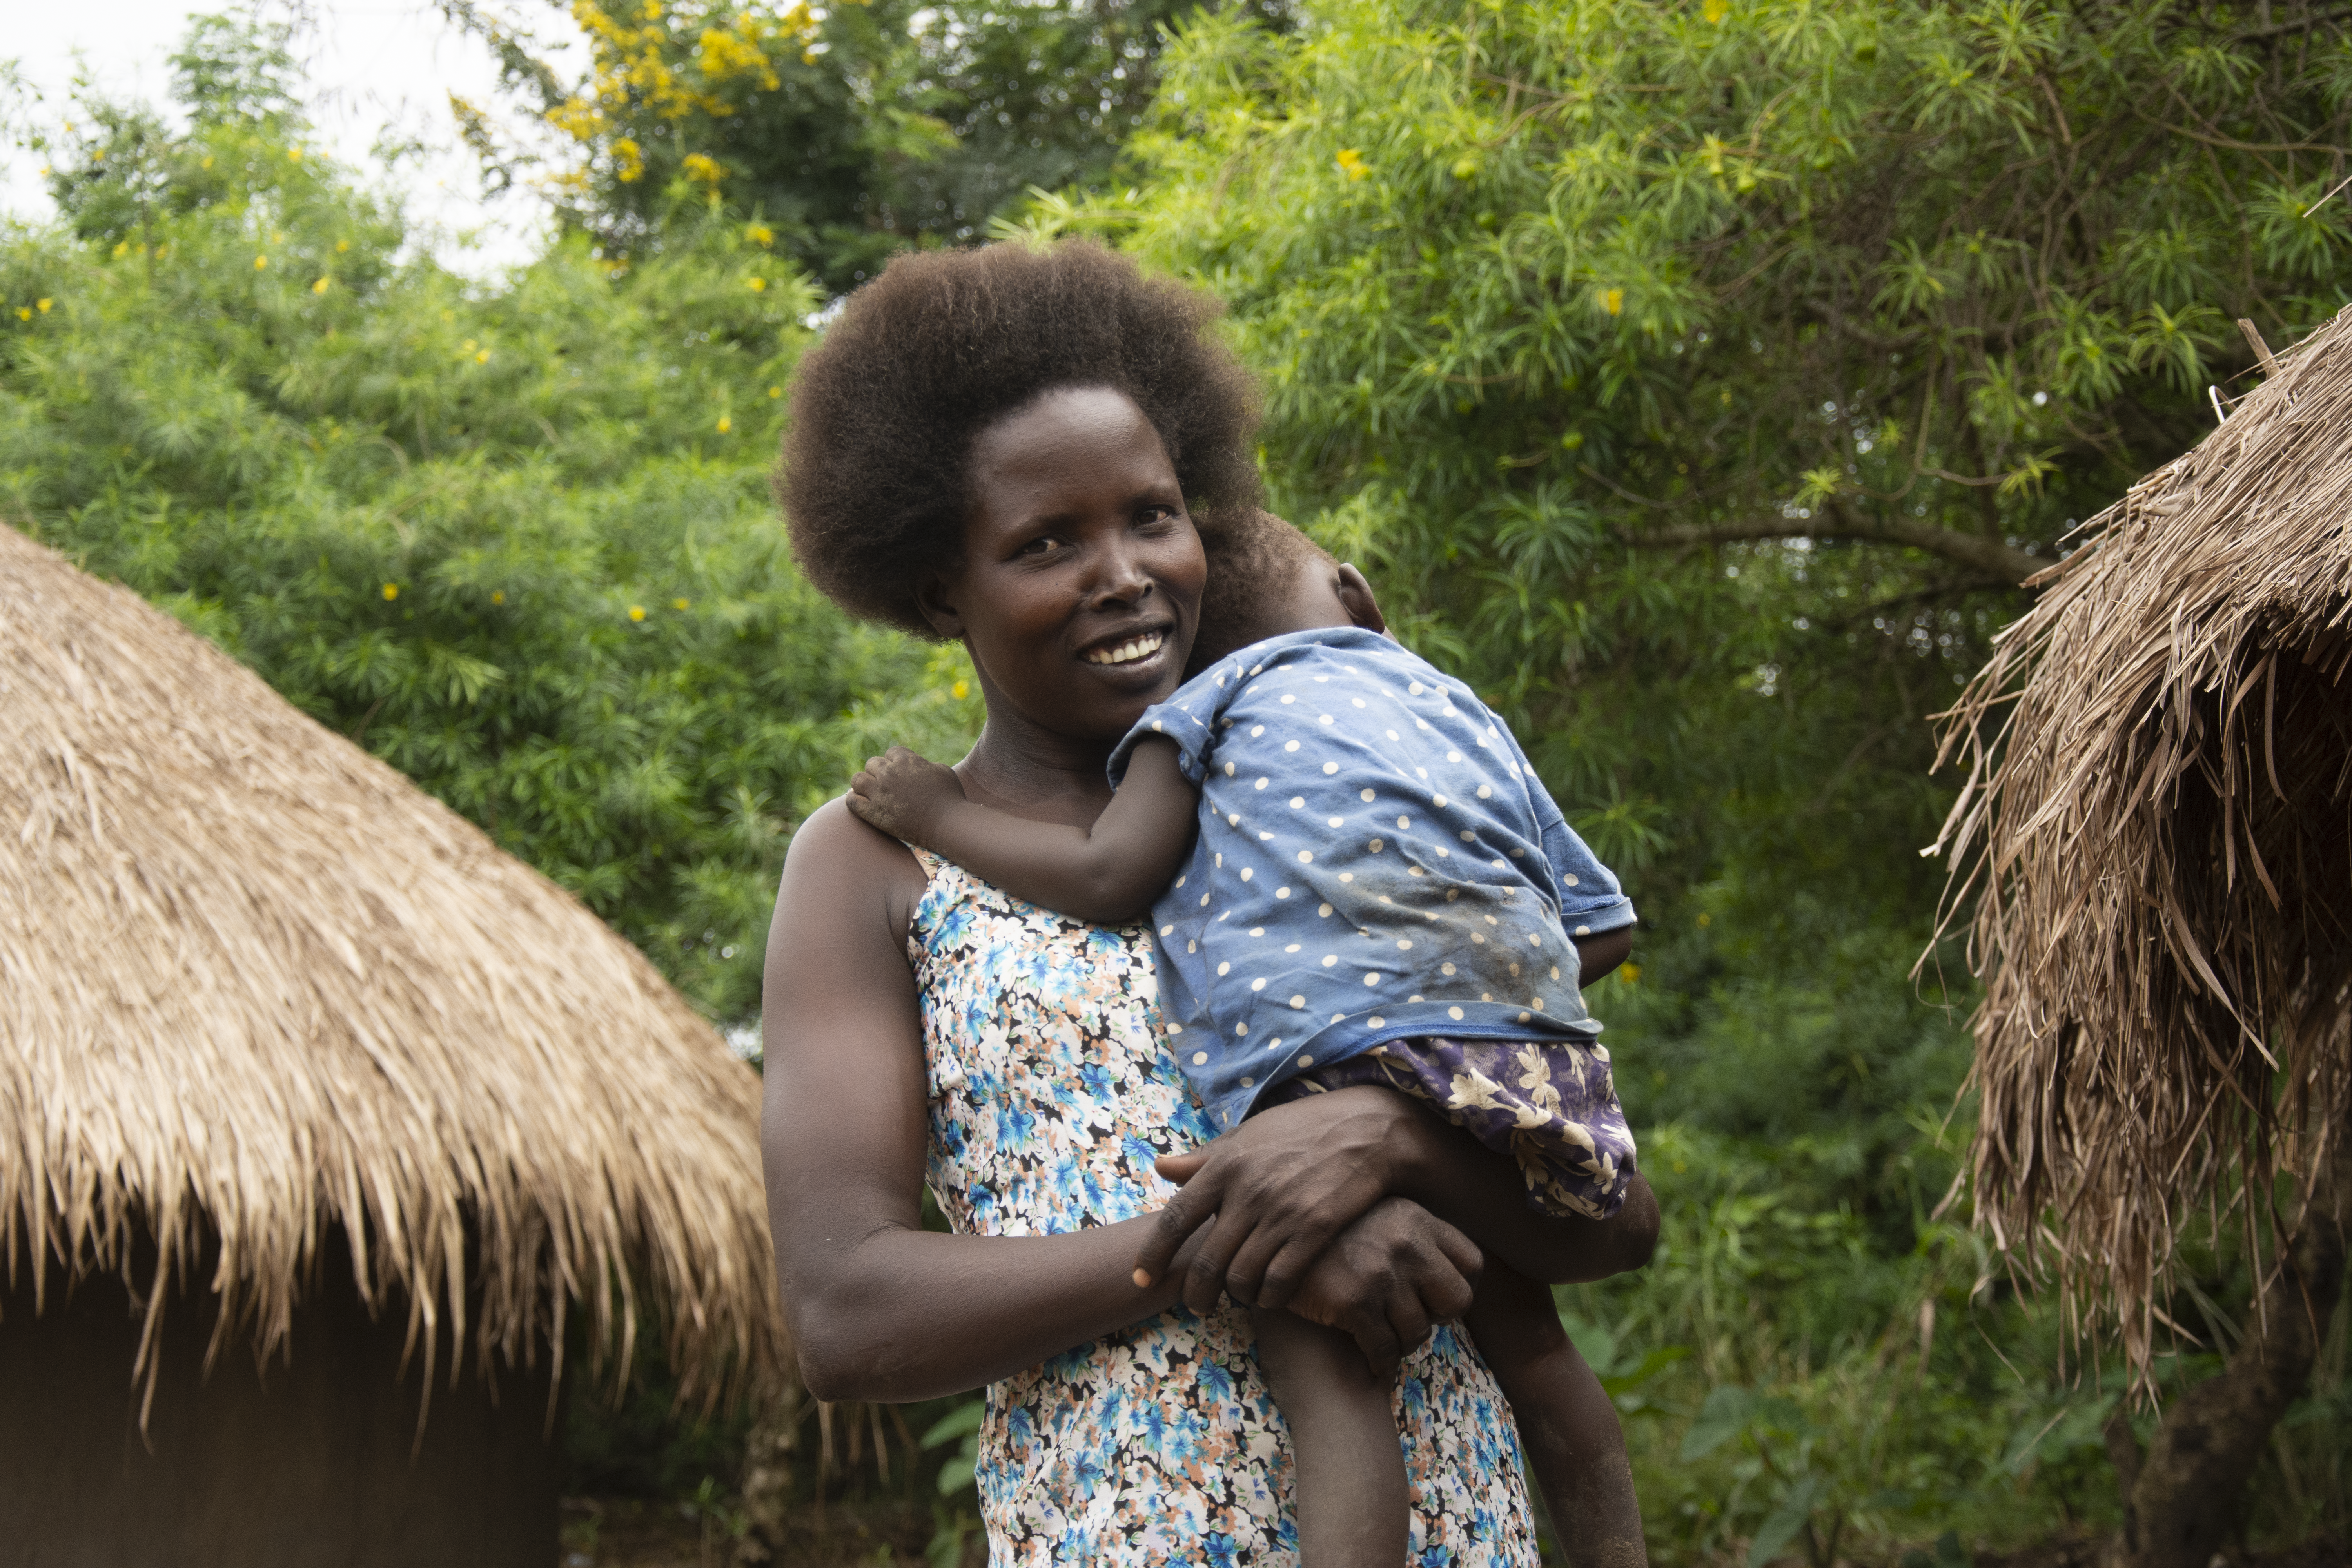 A woman stands with a baby resting on her shoulder. She is smiling